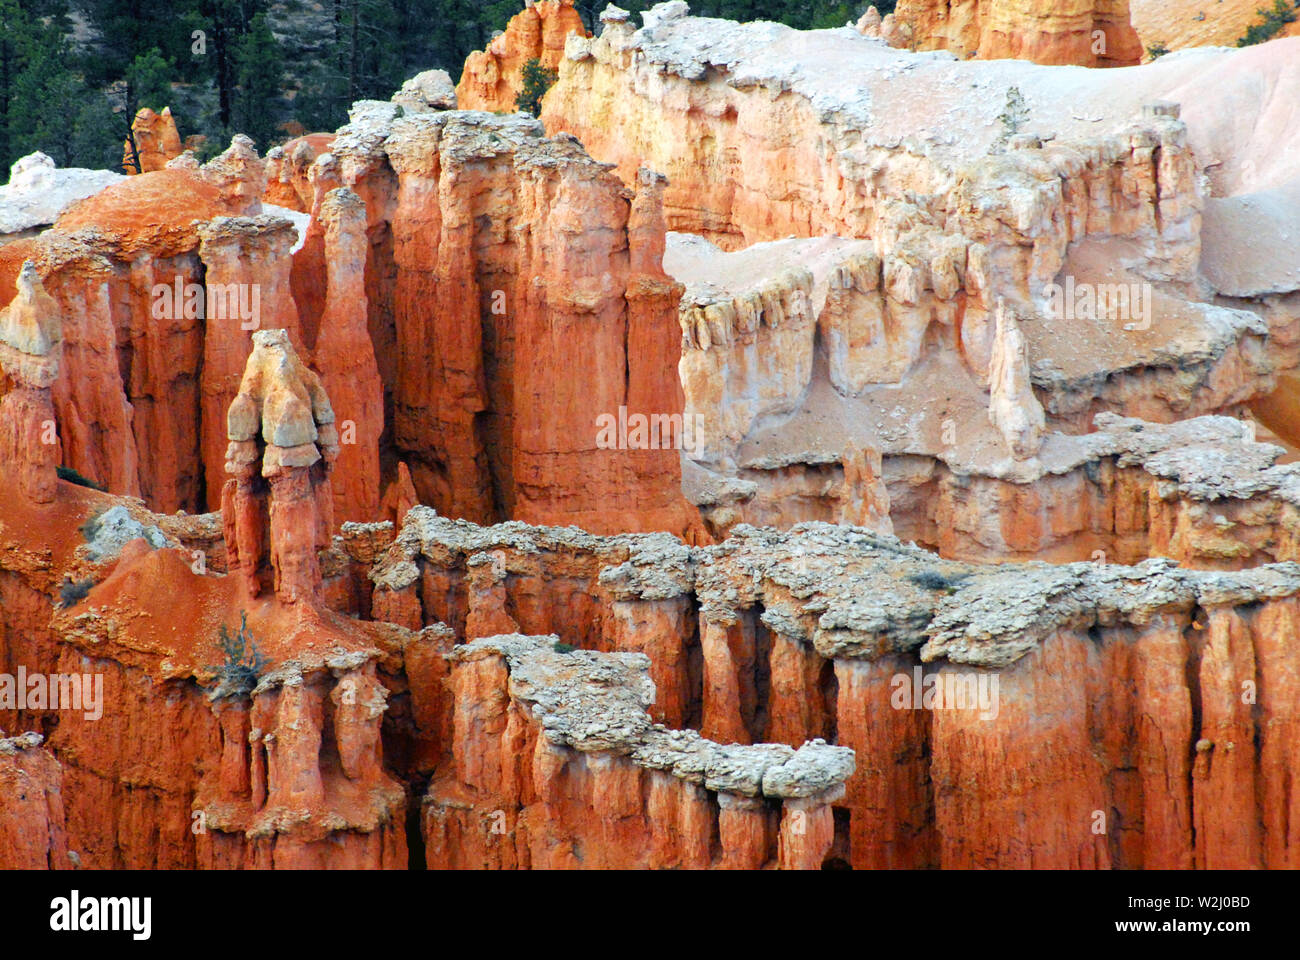 Panorama fo gorgeous Bryce Canyon in Utah, USA which is known world over for the amazing colorful sandstone formations called Hoodoos. Stock Photo